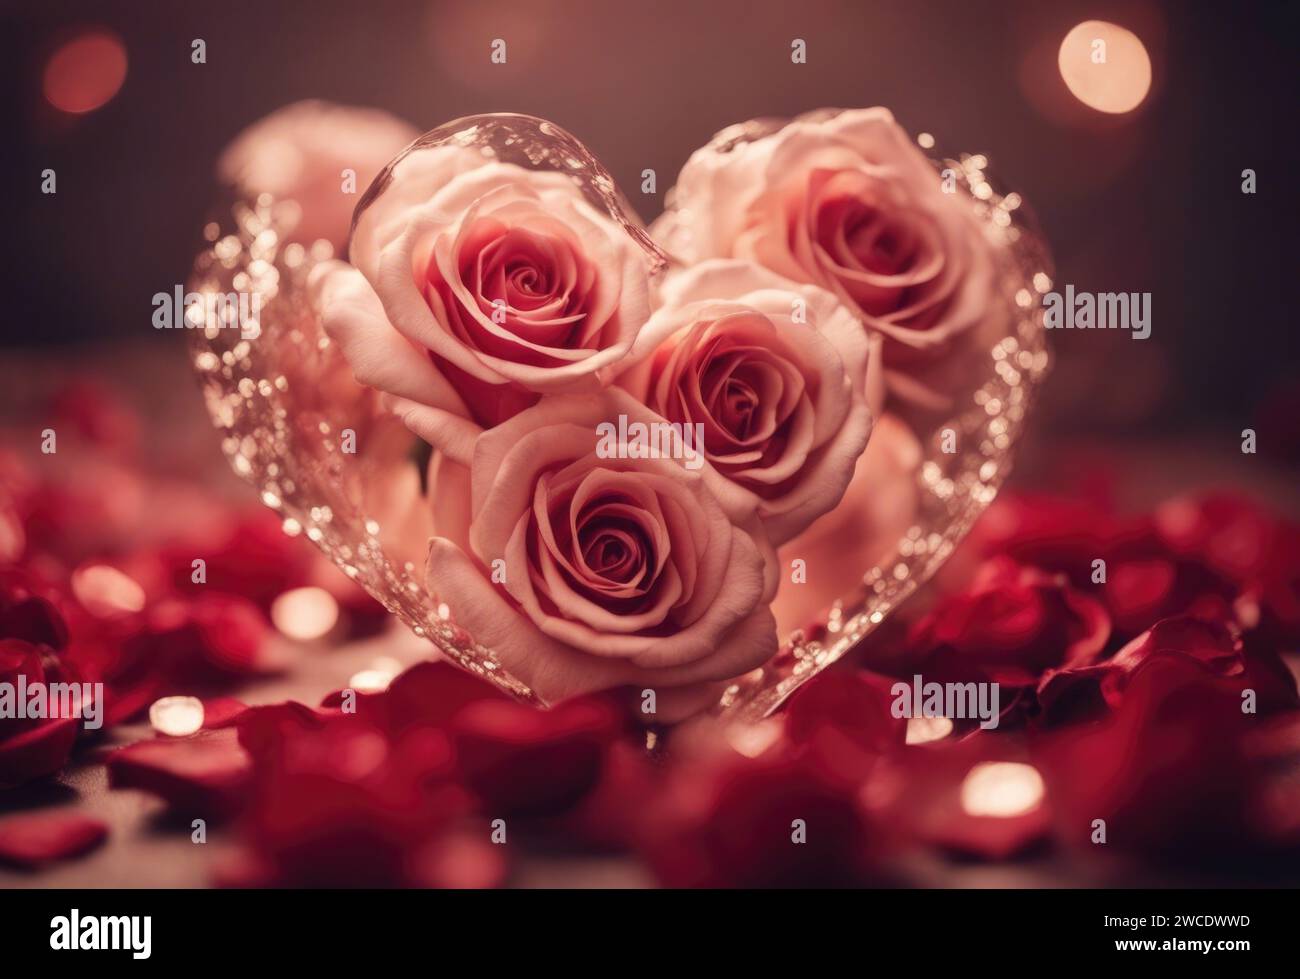 An AI illustration of a beautifully arranged bouquet of red roses in a glass vase, shaped into the form of a heart, placed on a wooden table Stock Photo